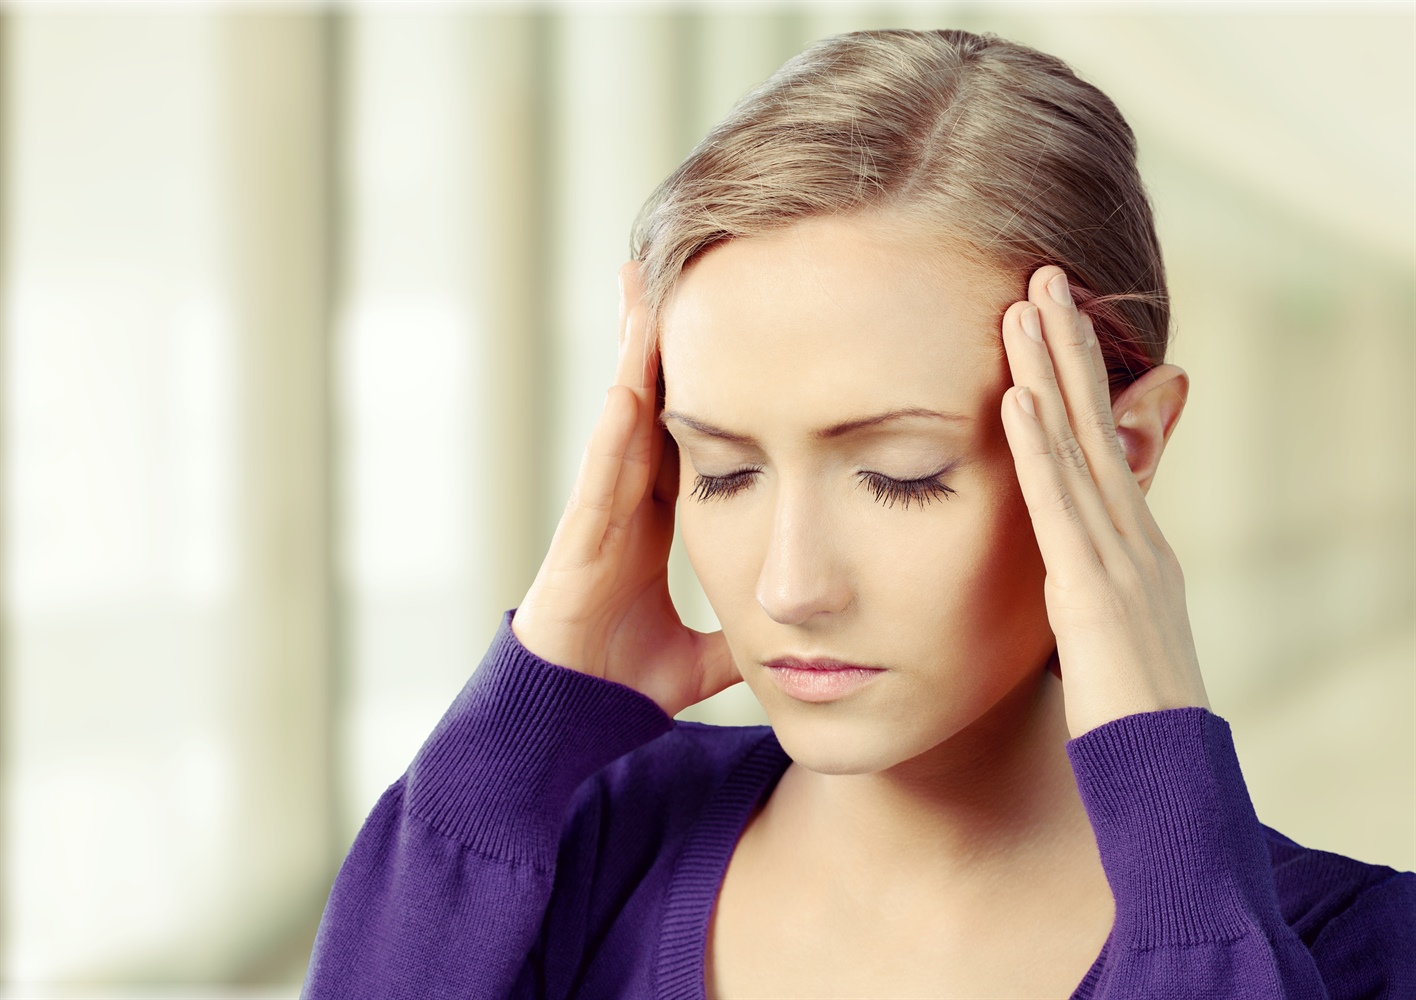 Chiropractic care for headaches and migraines.